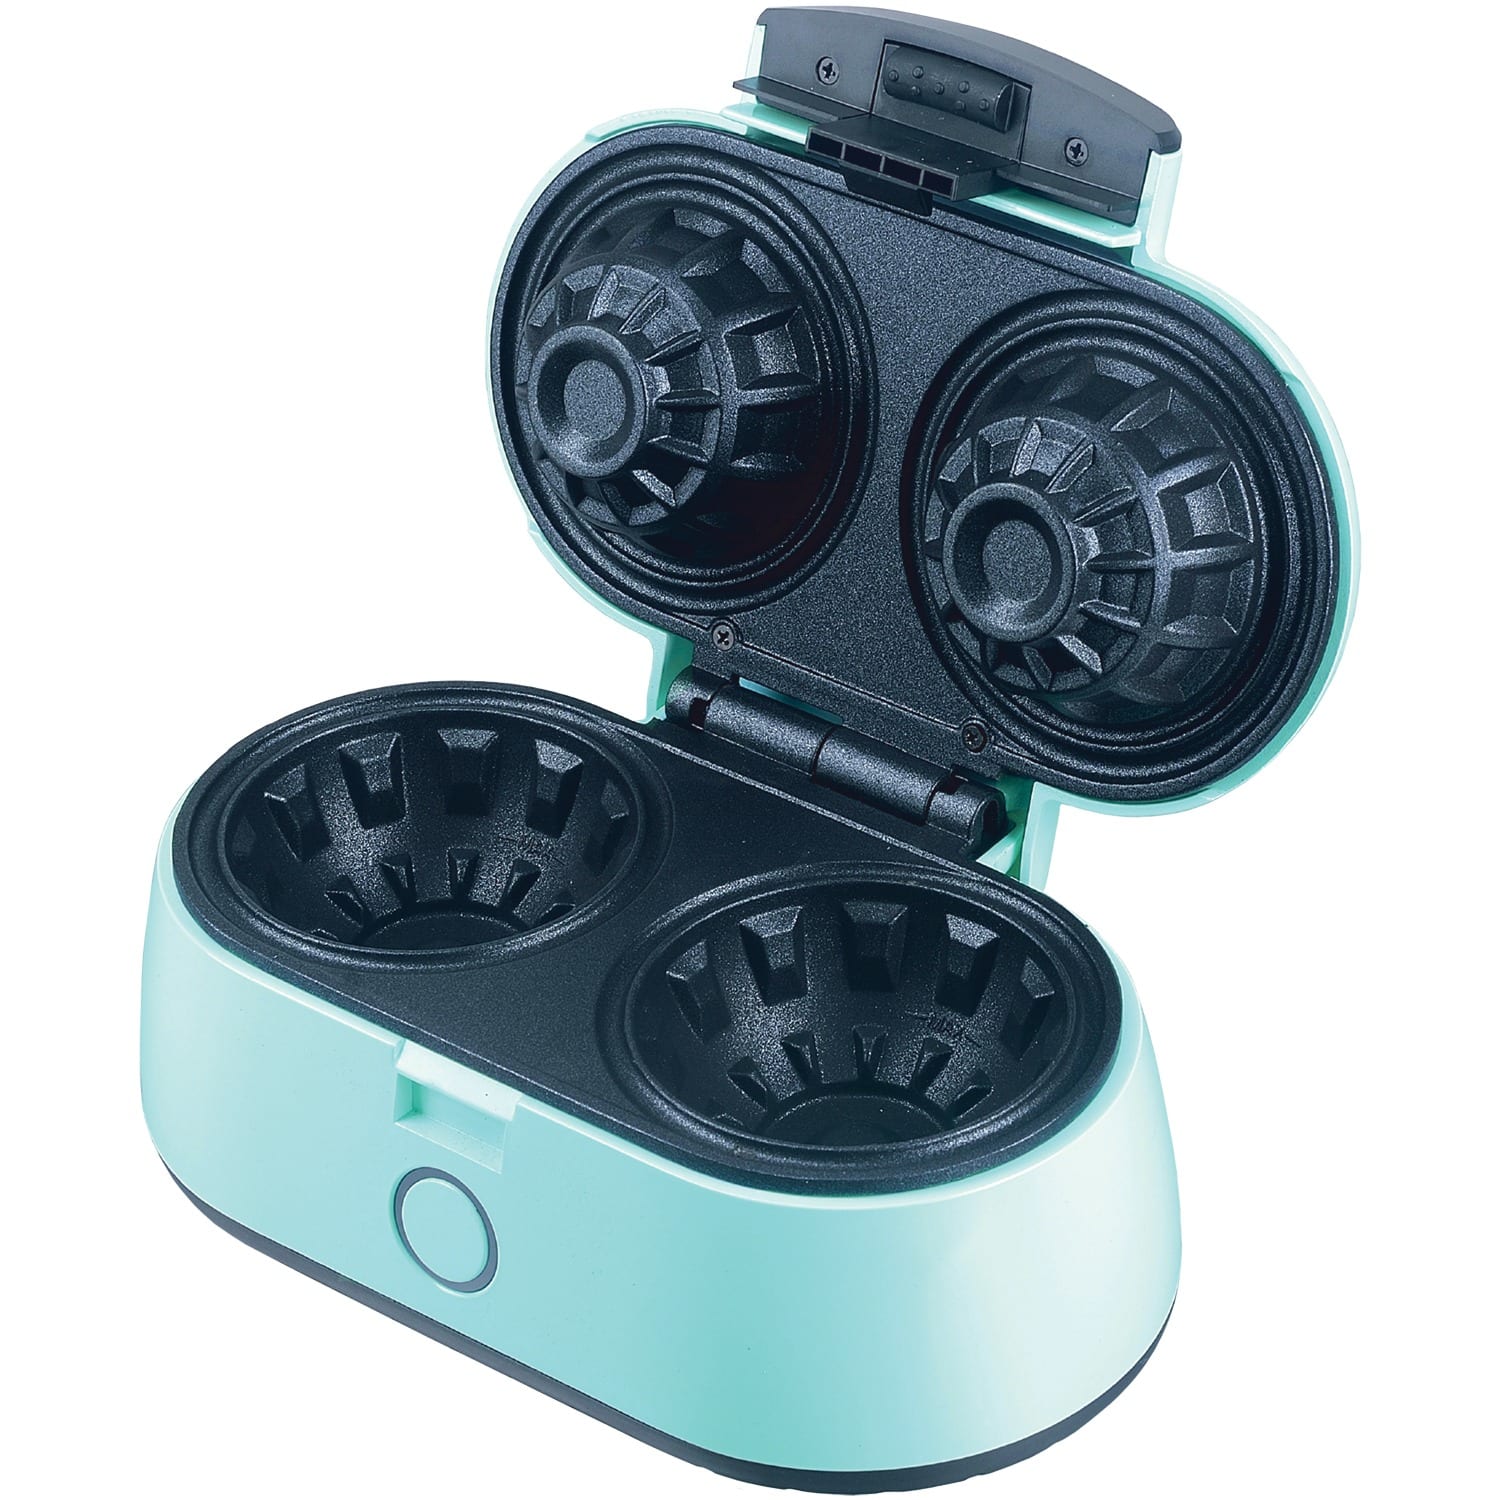 brentwood Brentwood 5 Inch Electric Waffle Bowl Maker in Blue - Non-Stick  Plates, Easy to Clean, Power Indicator Lights in the Waffle Makers  department at